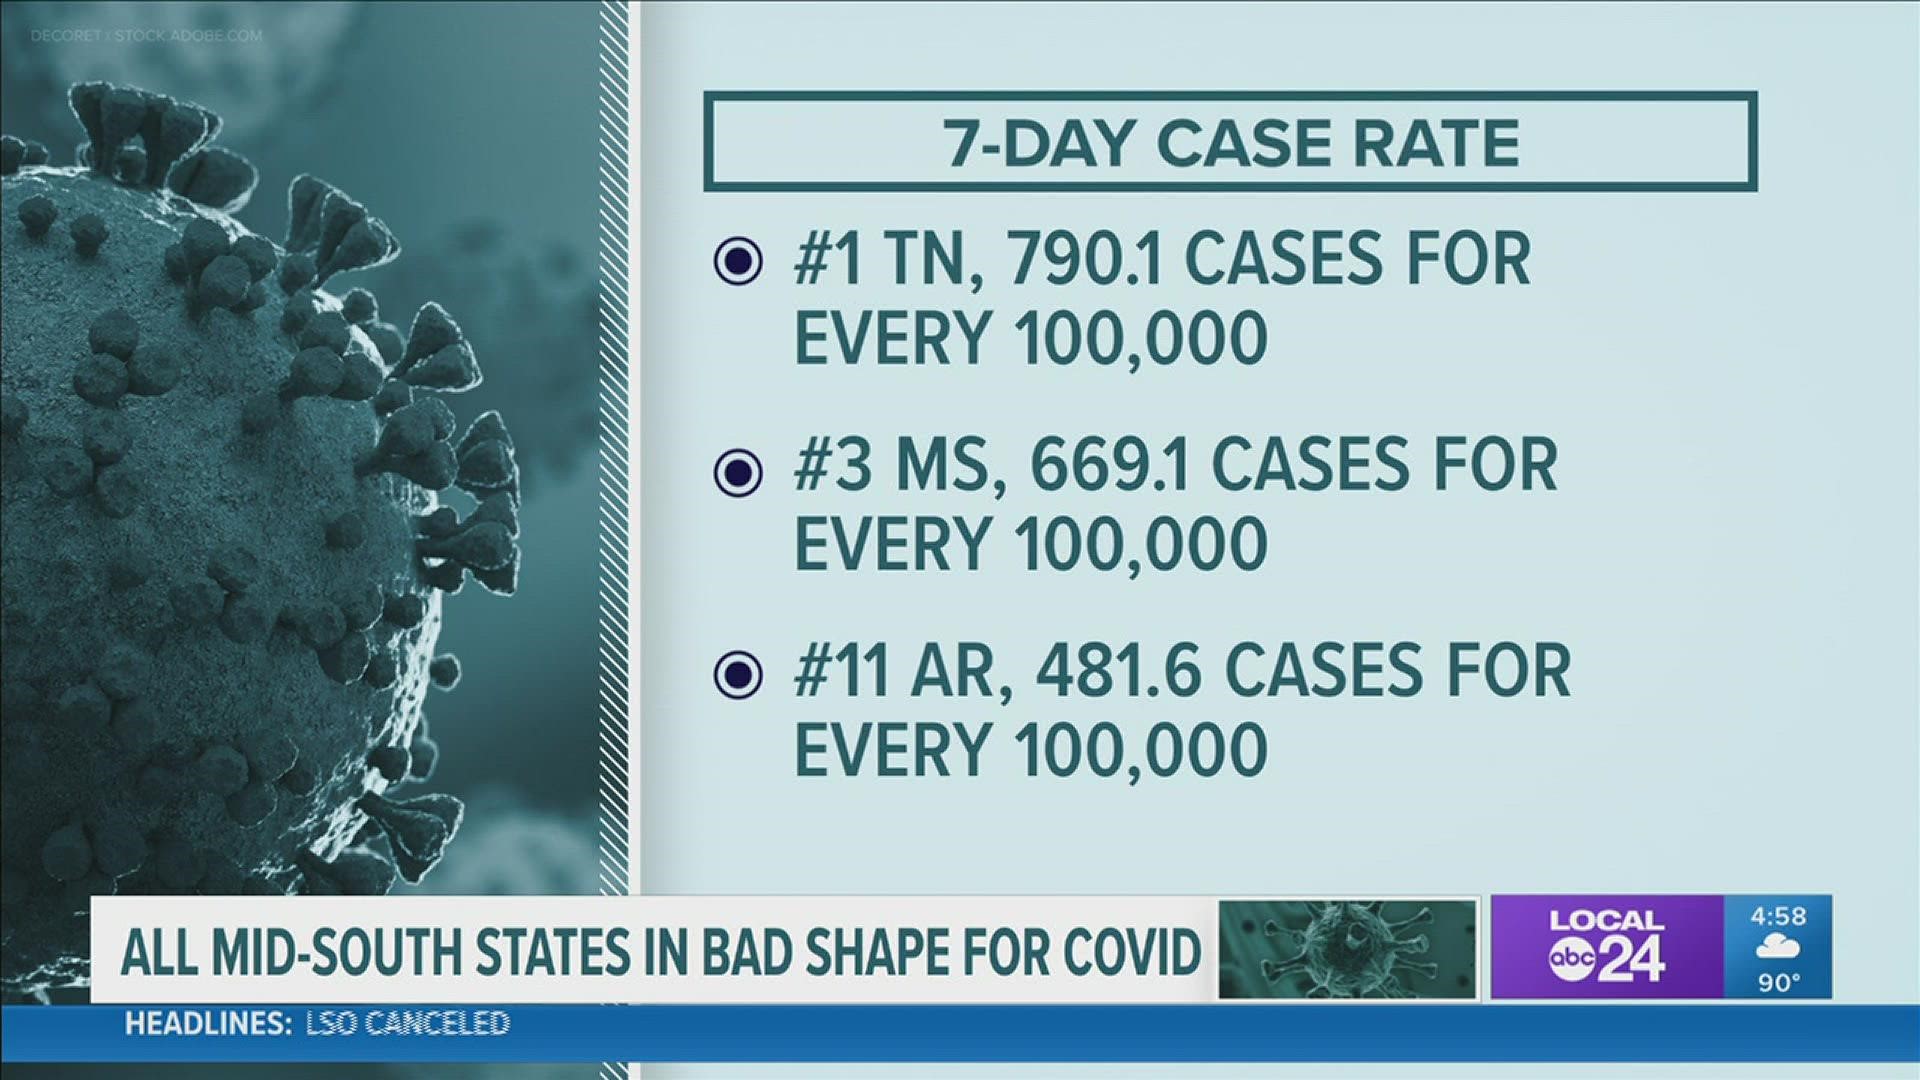 Mississippi and Arkansas aren't far behind for the latest 7-day case rates in the nation.